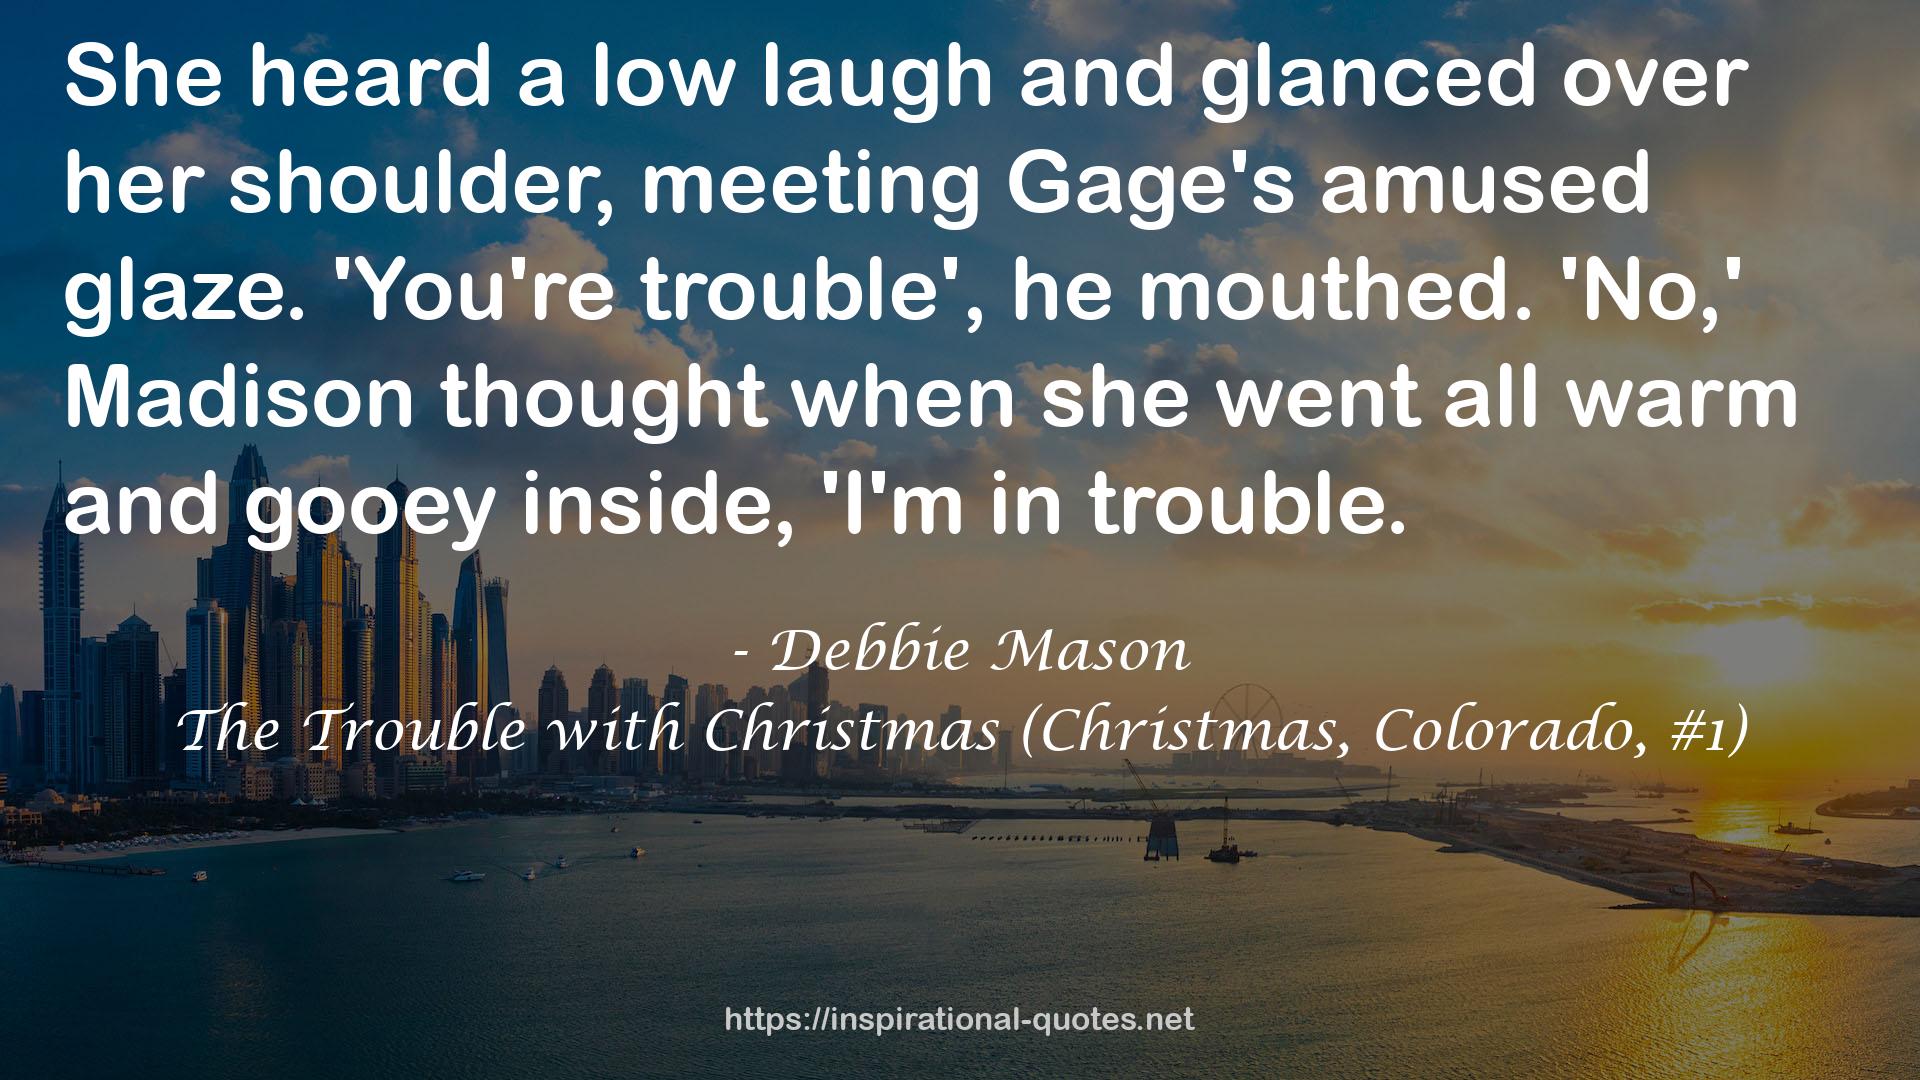 The Trouble with Christmas (Christmas, Colorado, #1) QUOTES